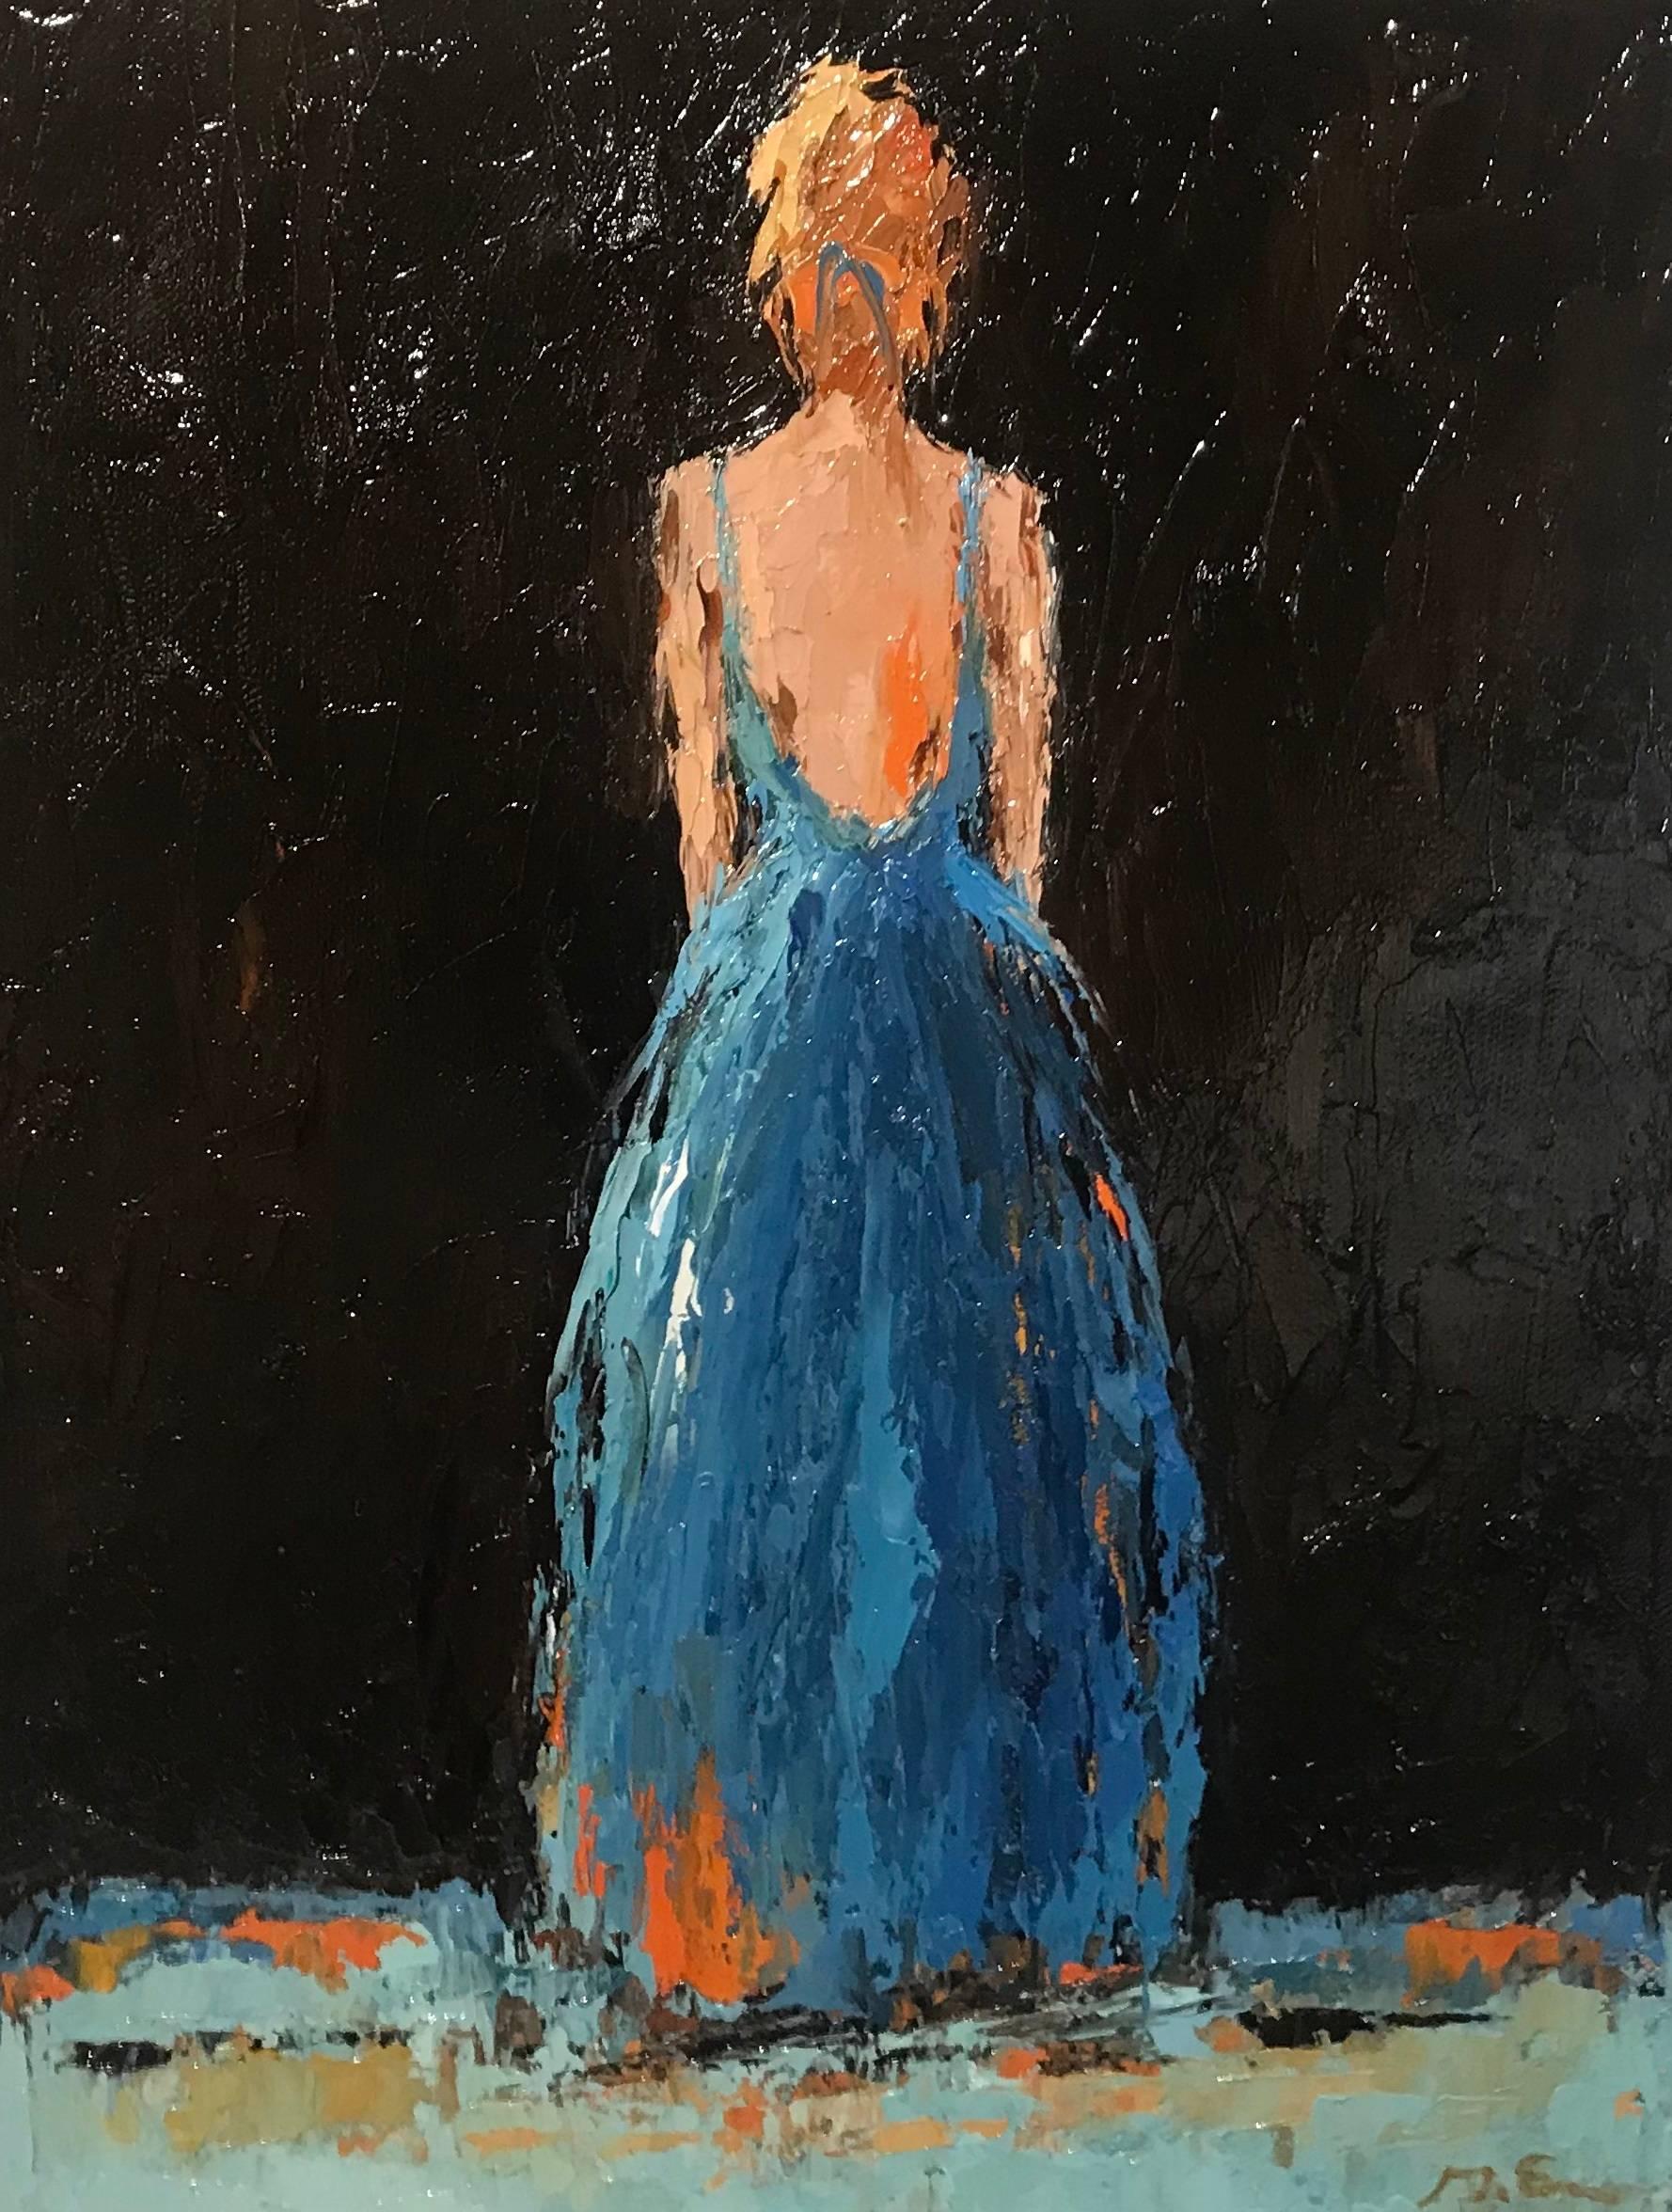 Geri Eubanks Figurative Painting - 'Nora', Small Size Oil on Canvas Figurative Impressionist Painting of a Lady